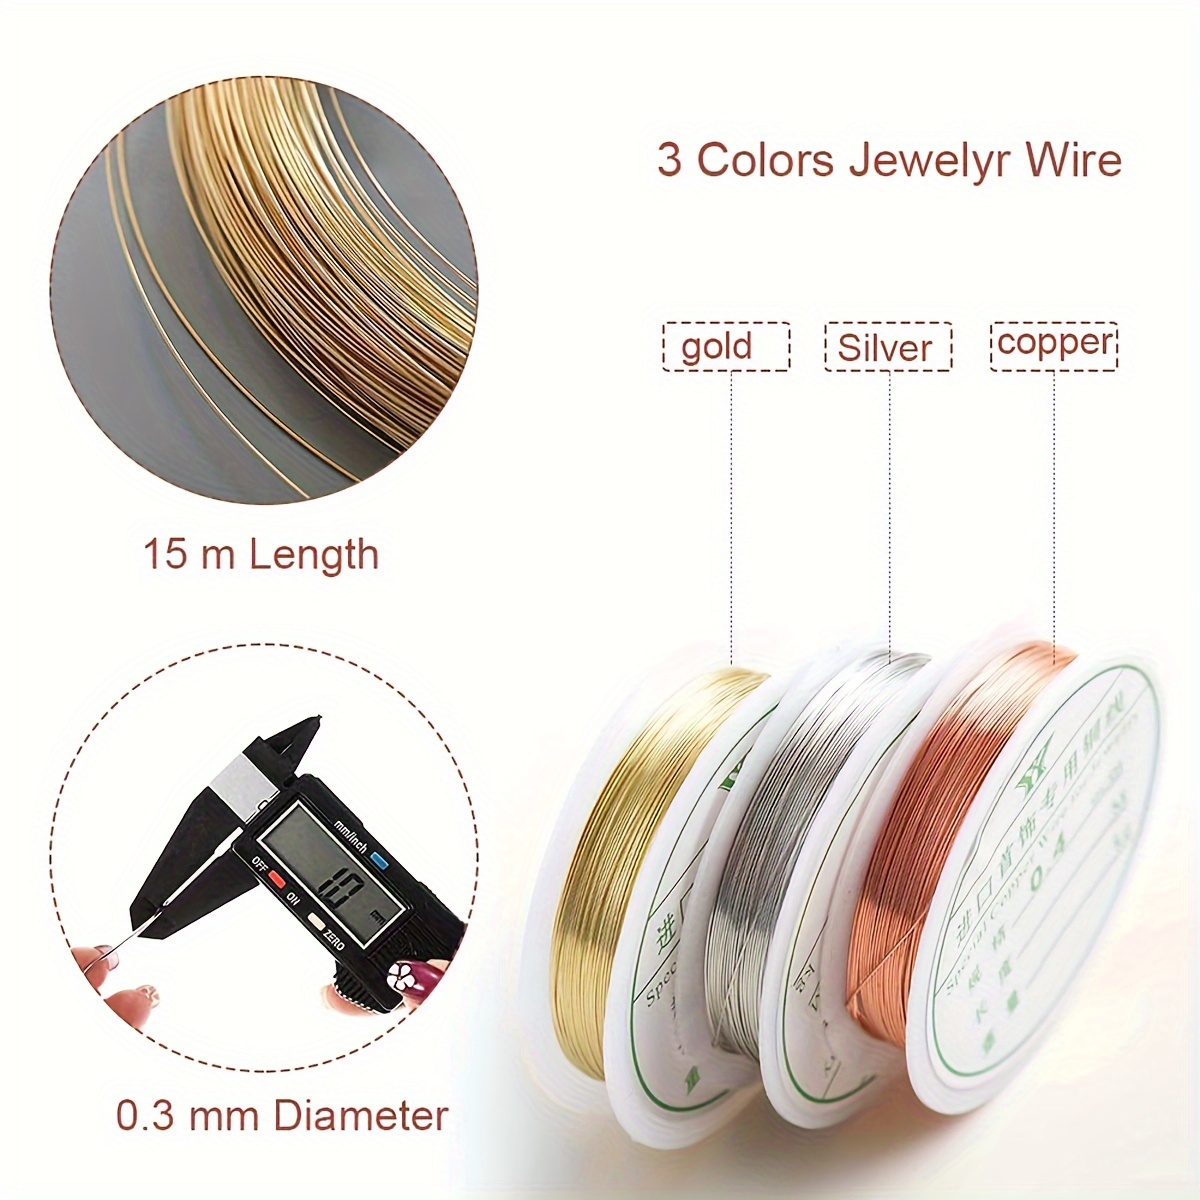 3 Rolls Uncoated Copper Wire Jewelry Beading Wire for DIY Craft Bracelet  Necklaces Jewelry Making Supplies(Gold, Silver, Rose-Gold)